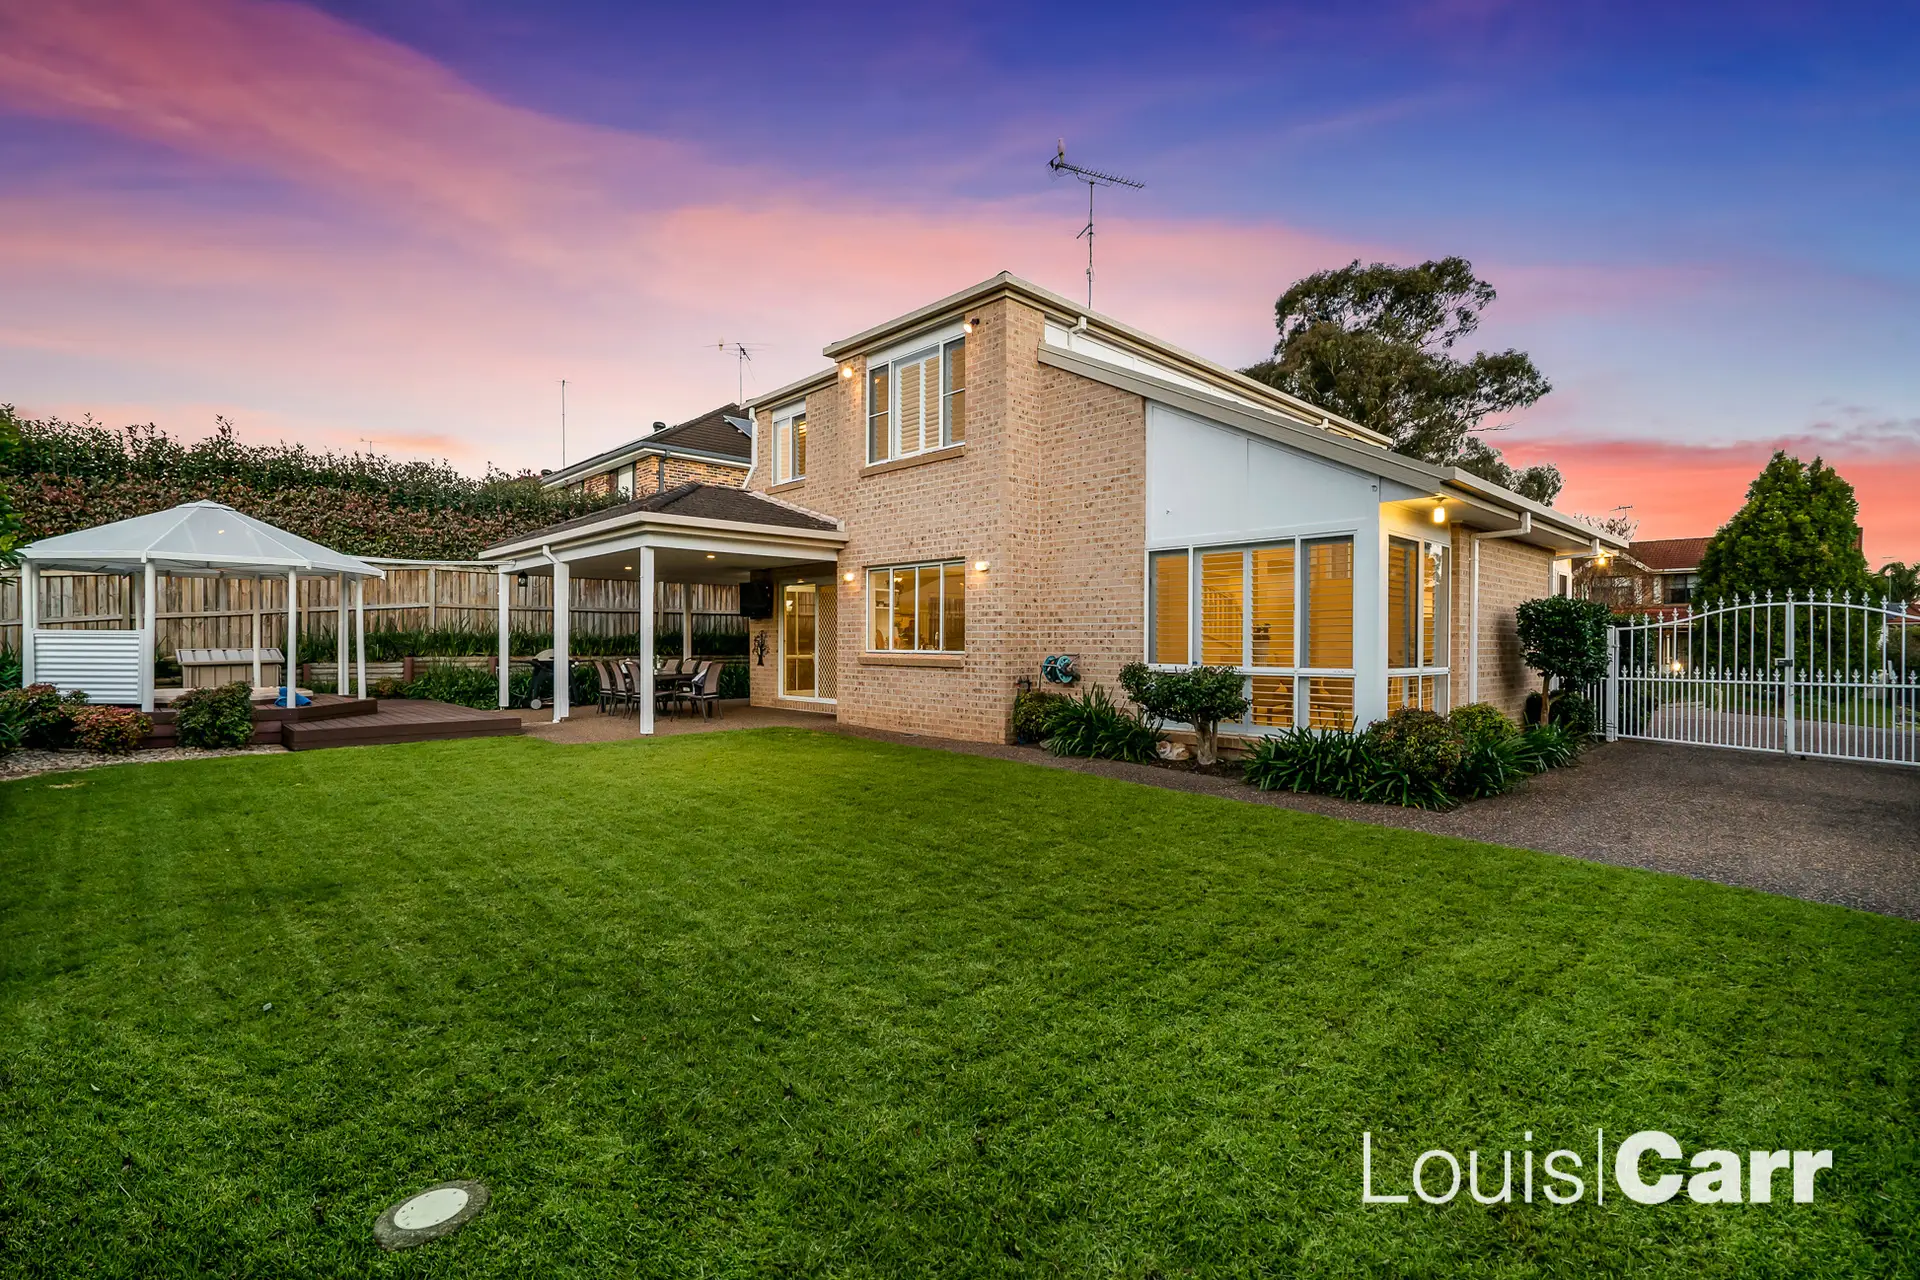 Photo #3: 3 Folkestone Place, Dural - Sold by Louis Carr Real Estate